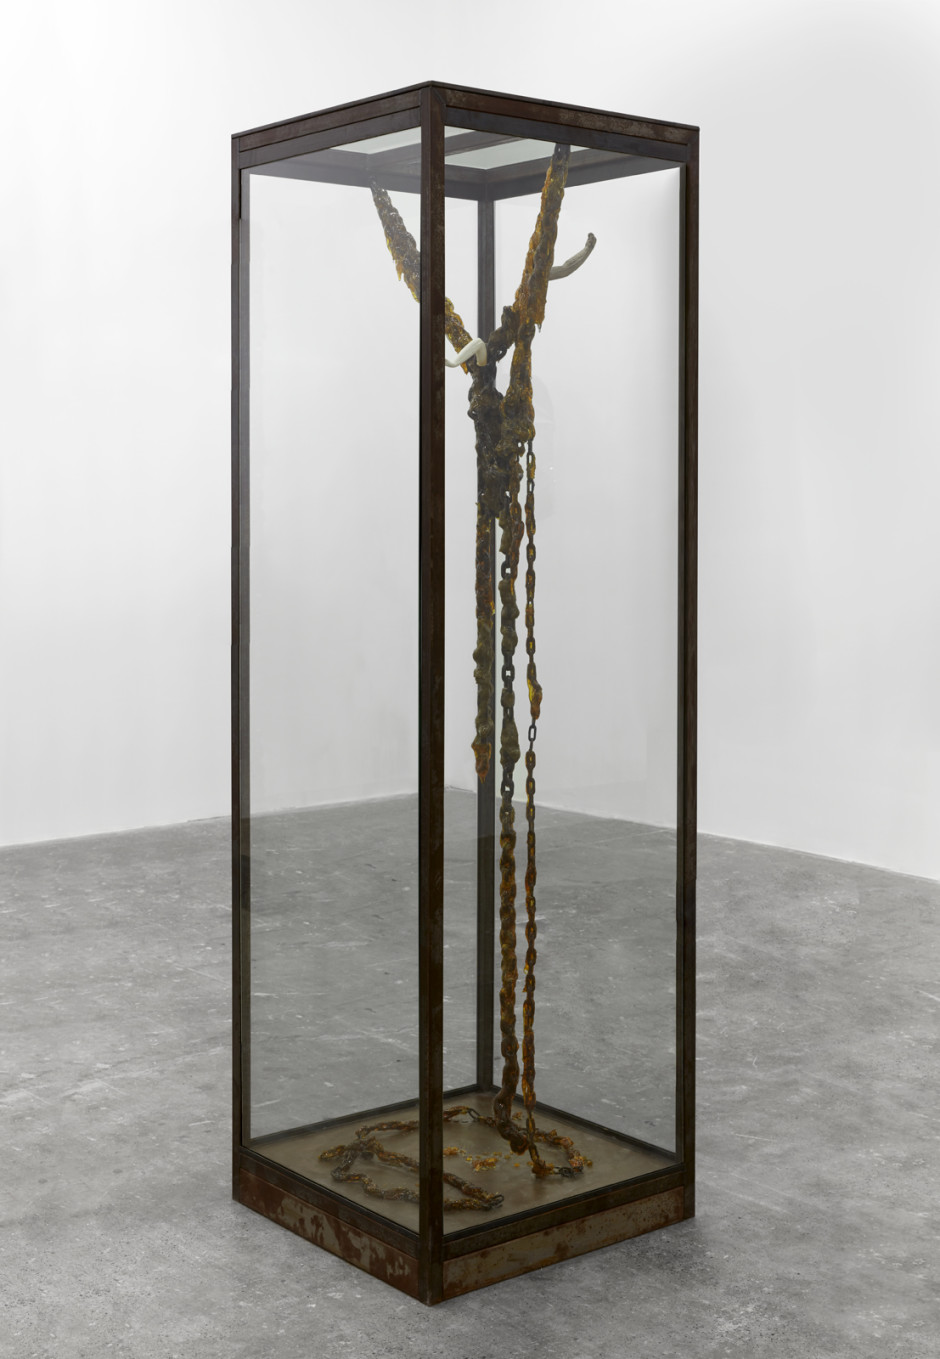 Etudes-Lento IV-1, 2018  steel, iron chain, resin, putty, colophony  67 x 67 x 220 cm / 26 ⅜ x 26 ⅜ x 86 ⅝ in